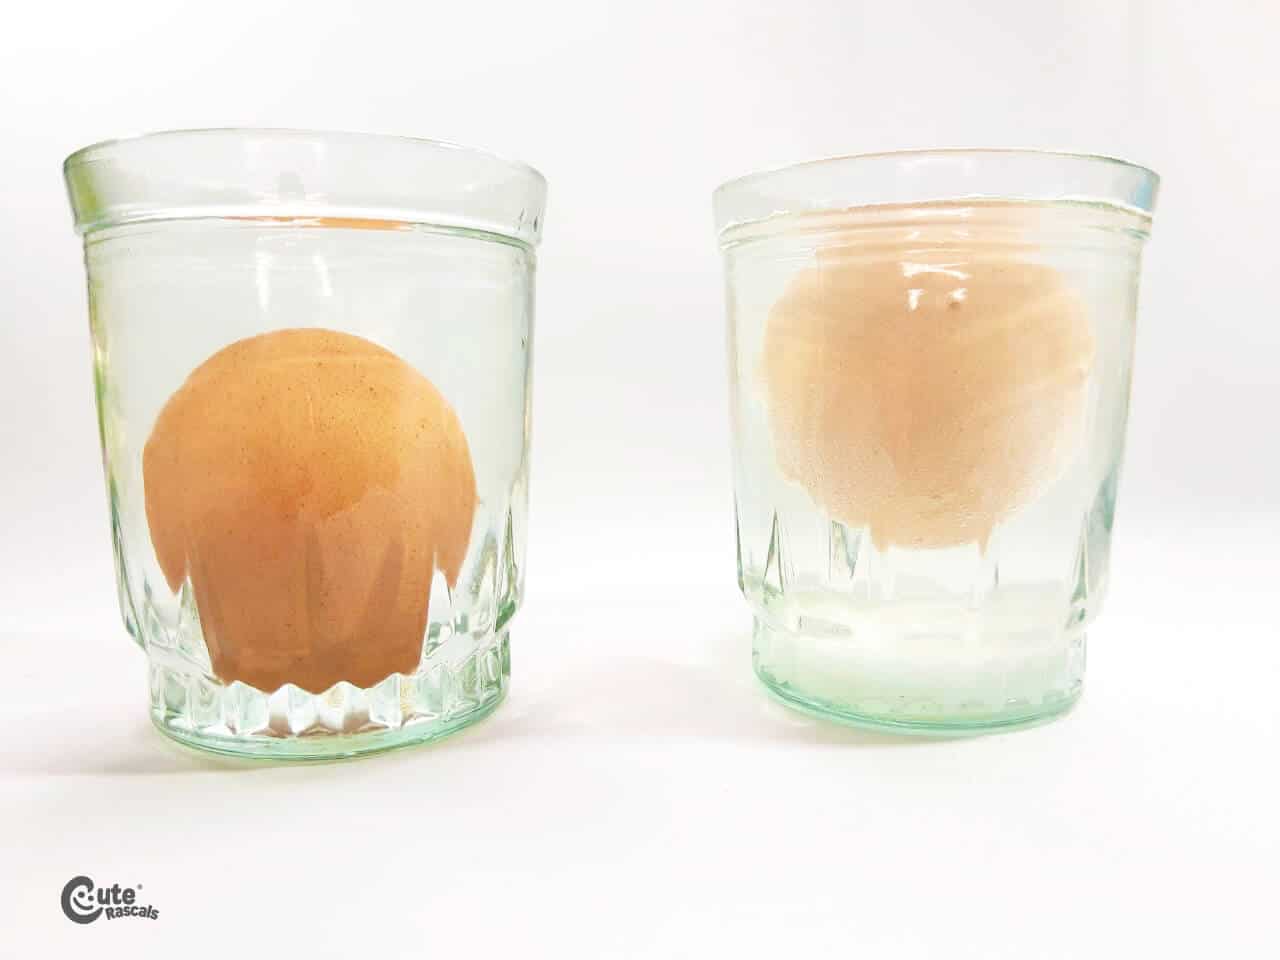 Floating eggs experiment